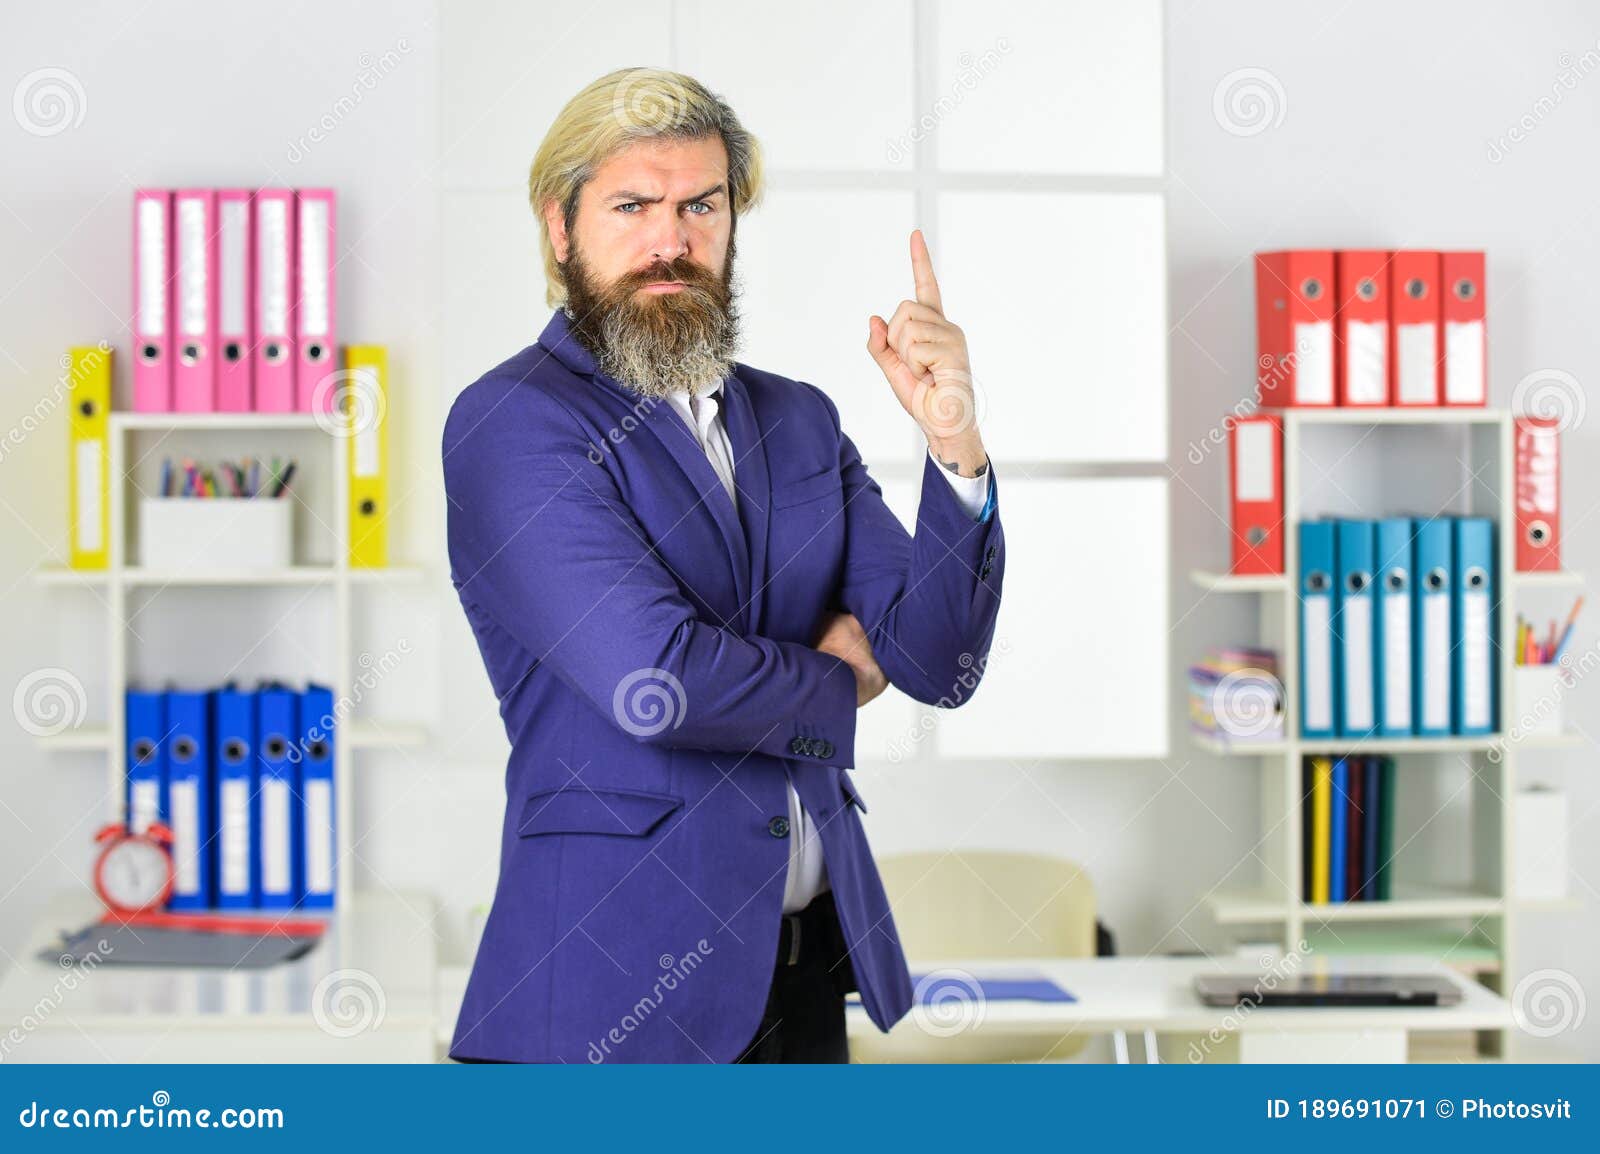 Business Success. Making Great Decisions. Man Manager at Workplace. Consider Consequences. Top Management Stock Image - Image of lawyer, 189691071